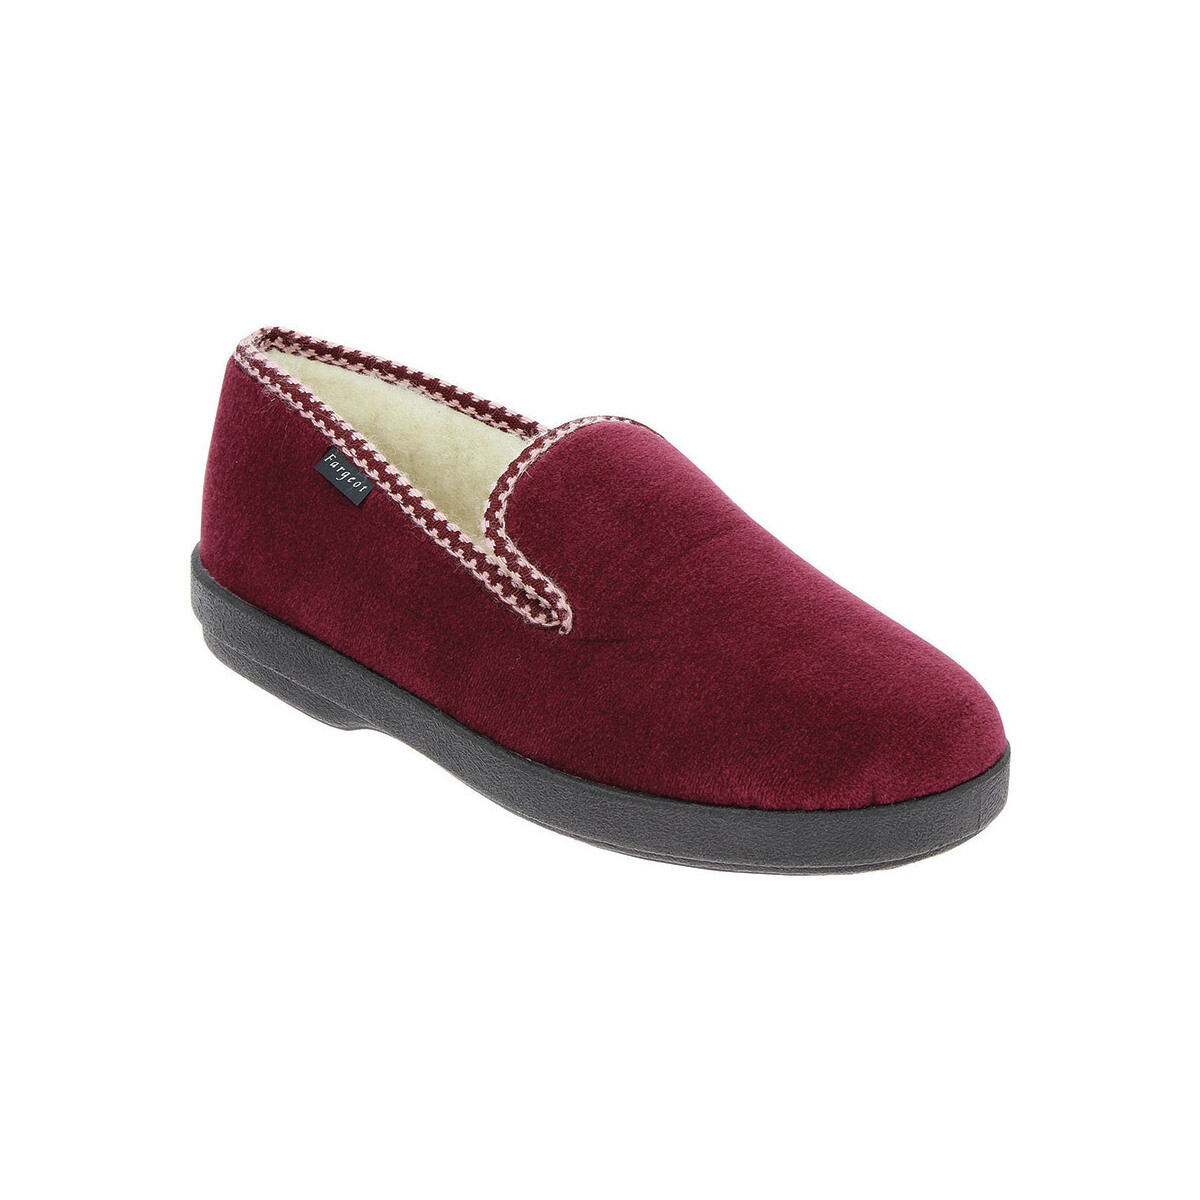 Chaussures Femme Chaussons Fargeot Charentaises GERMAINE Rouge